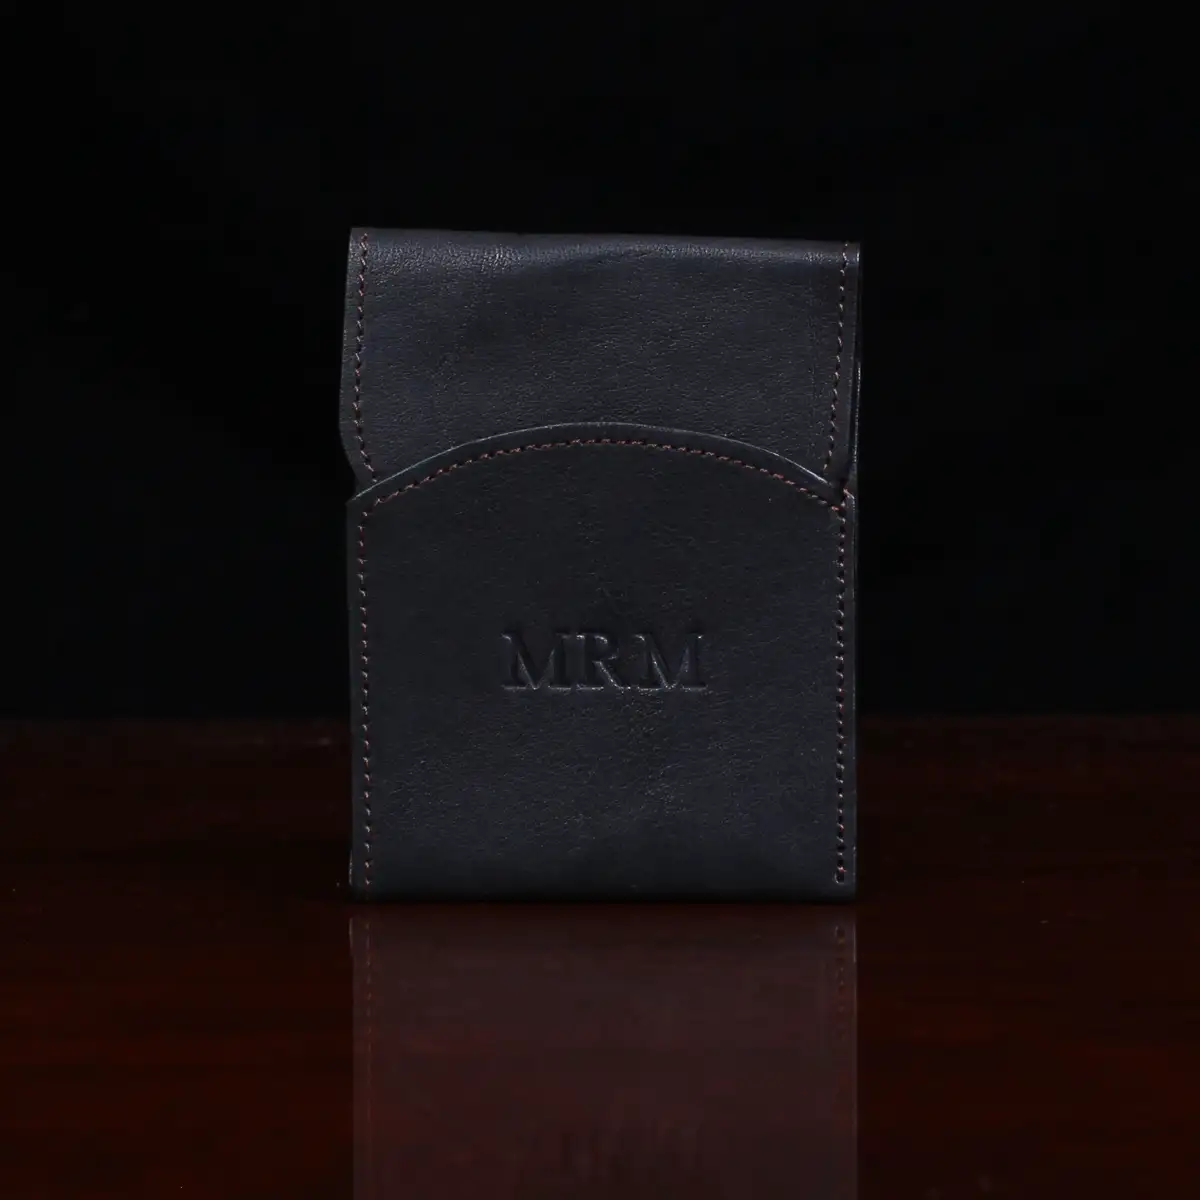 black leather front pocket wallet with flap on wood table